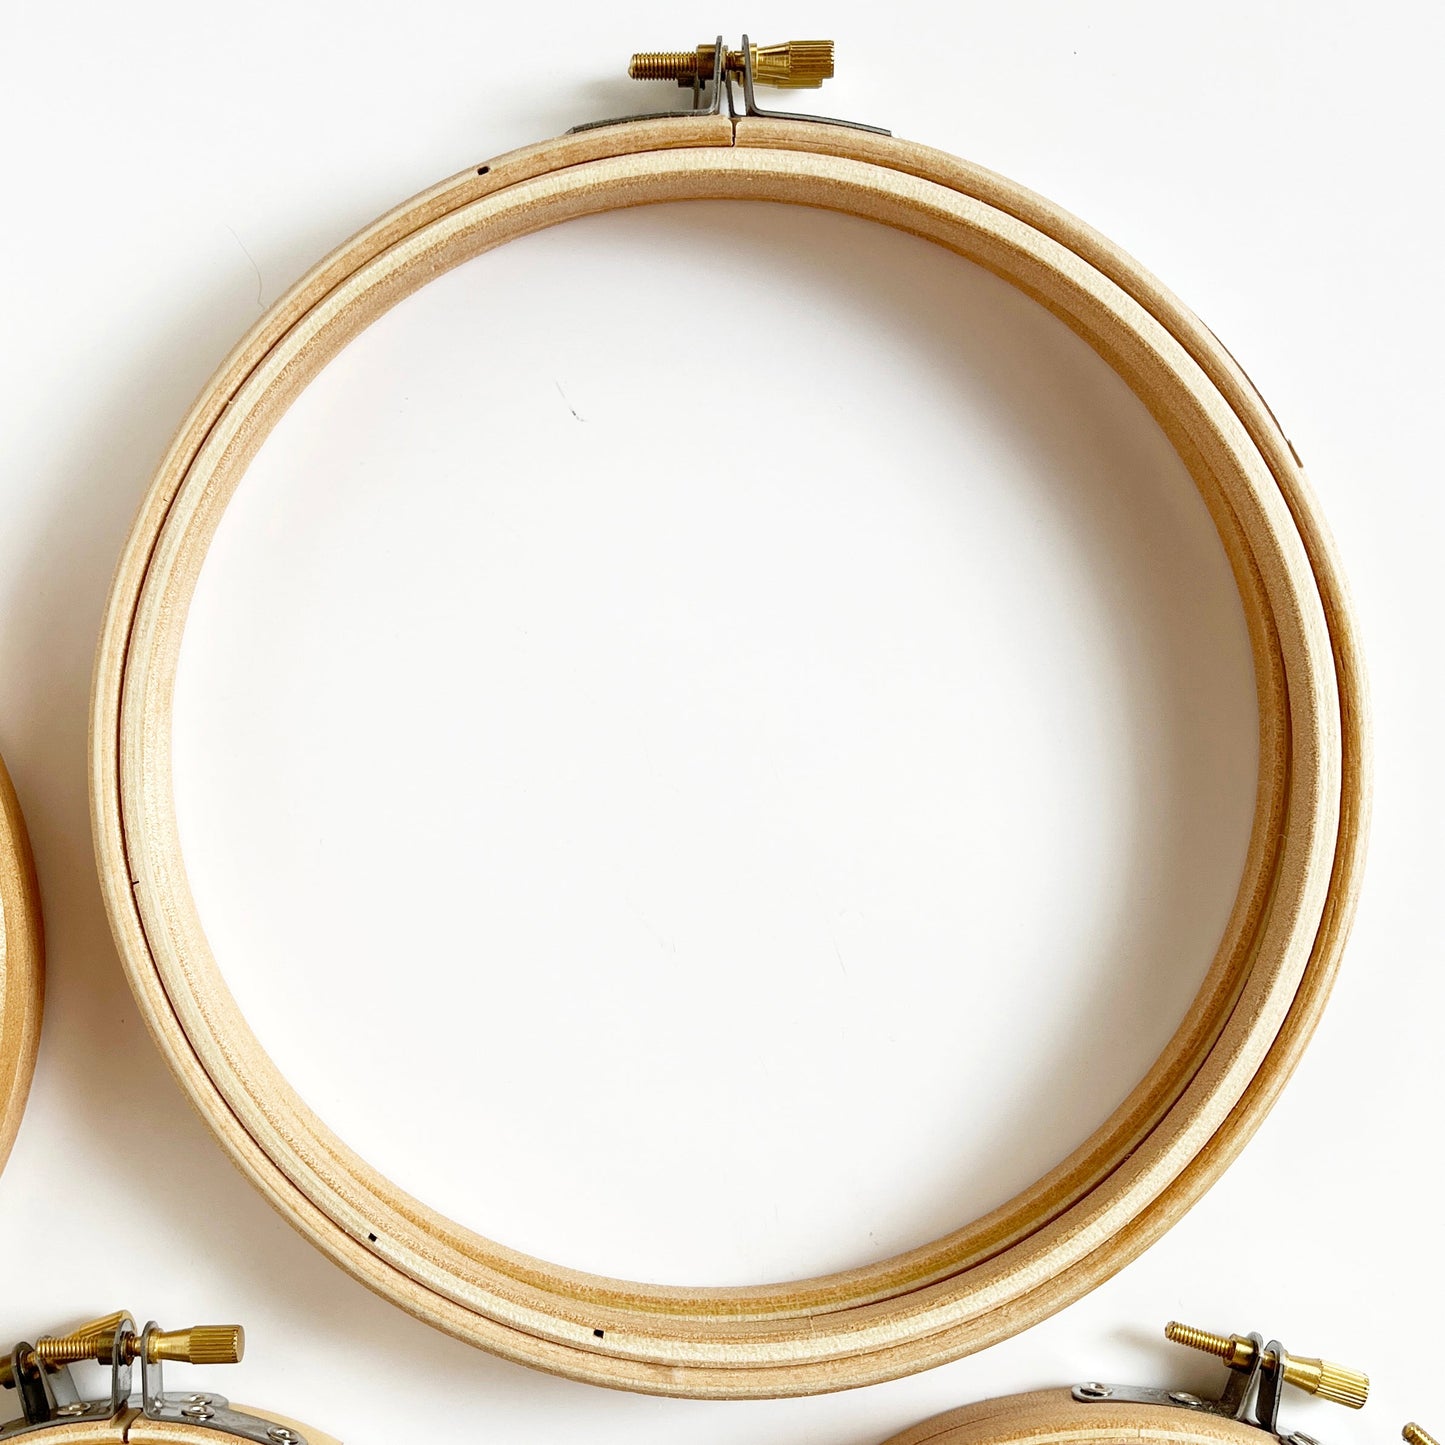 7 inch wooden Embroidery Hoops (I have too many!)